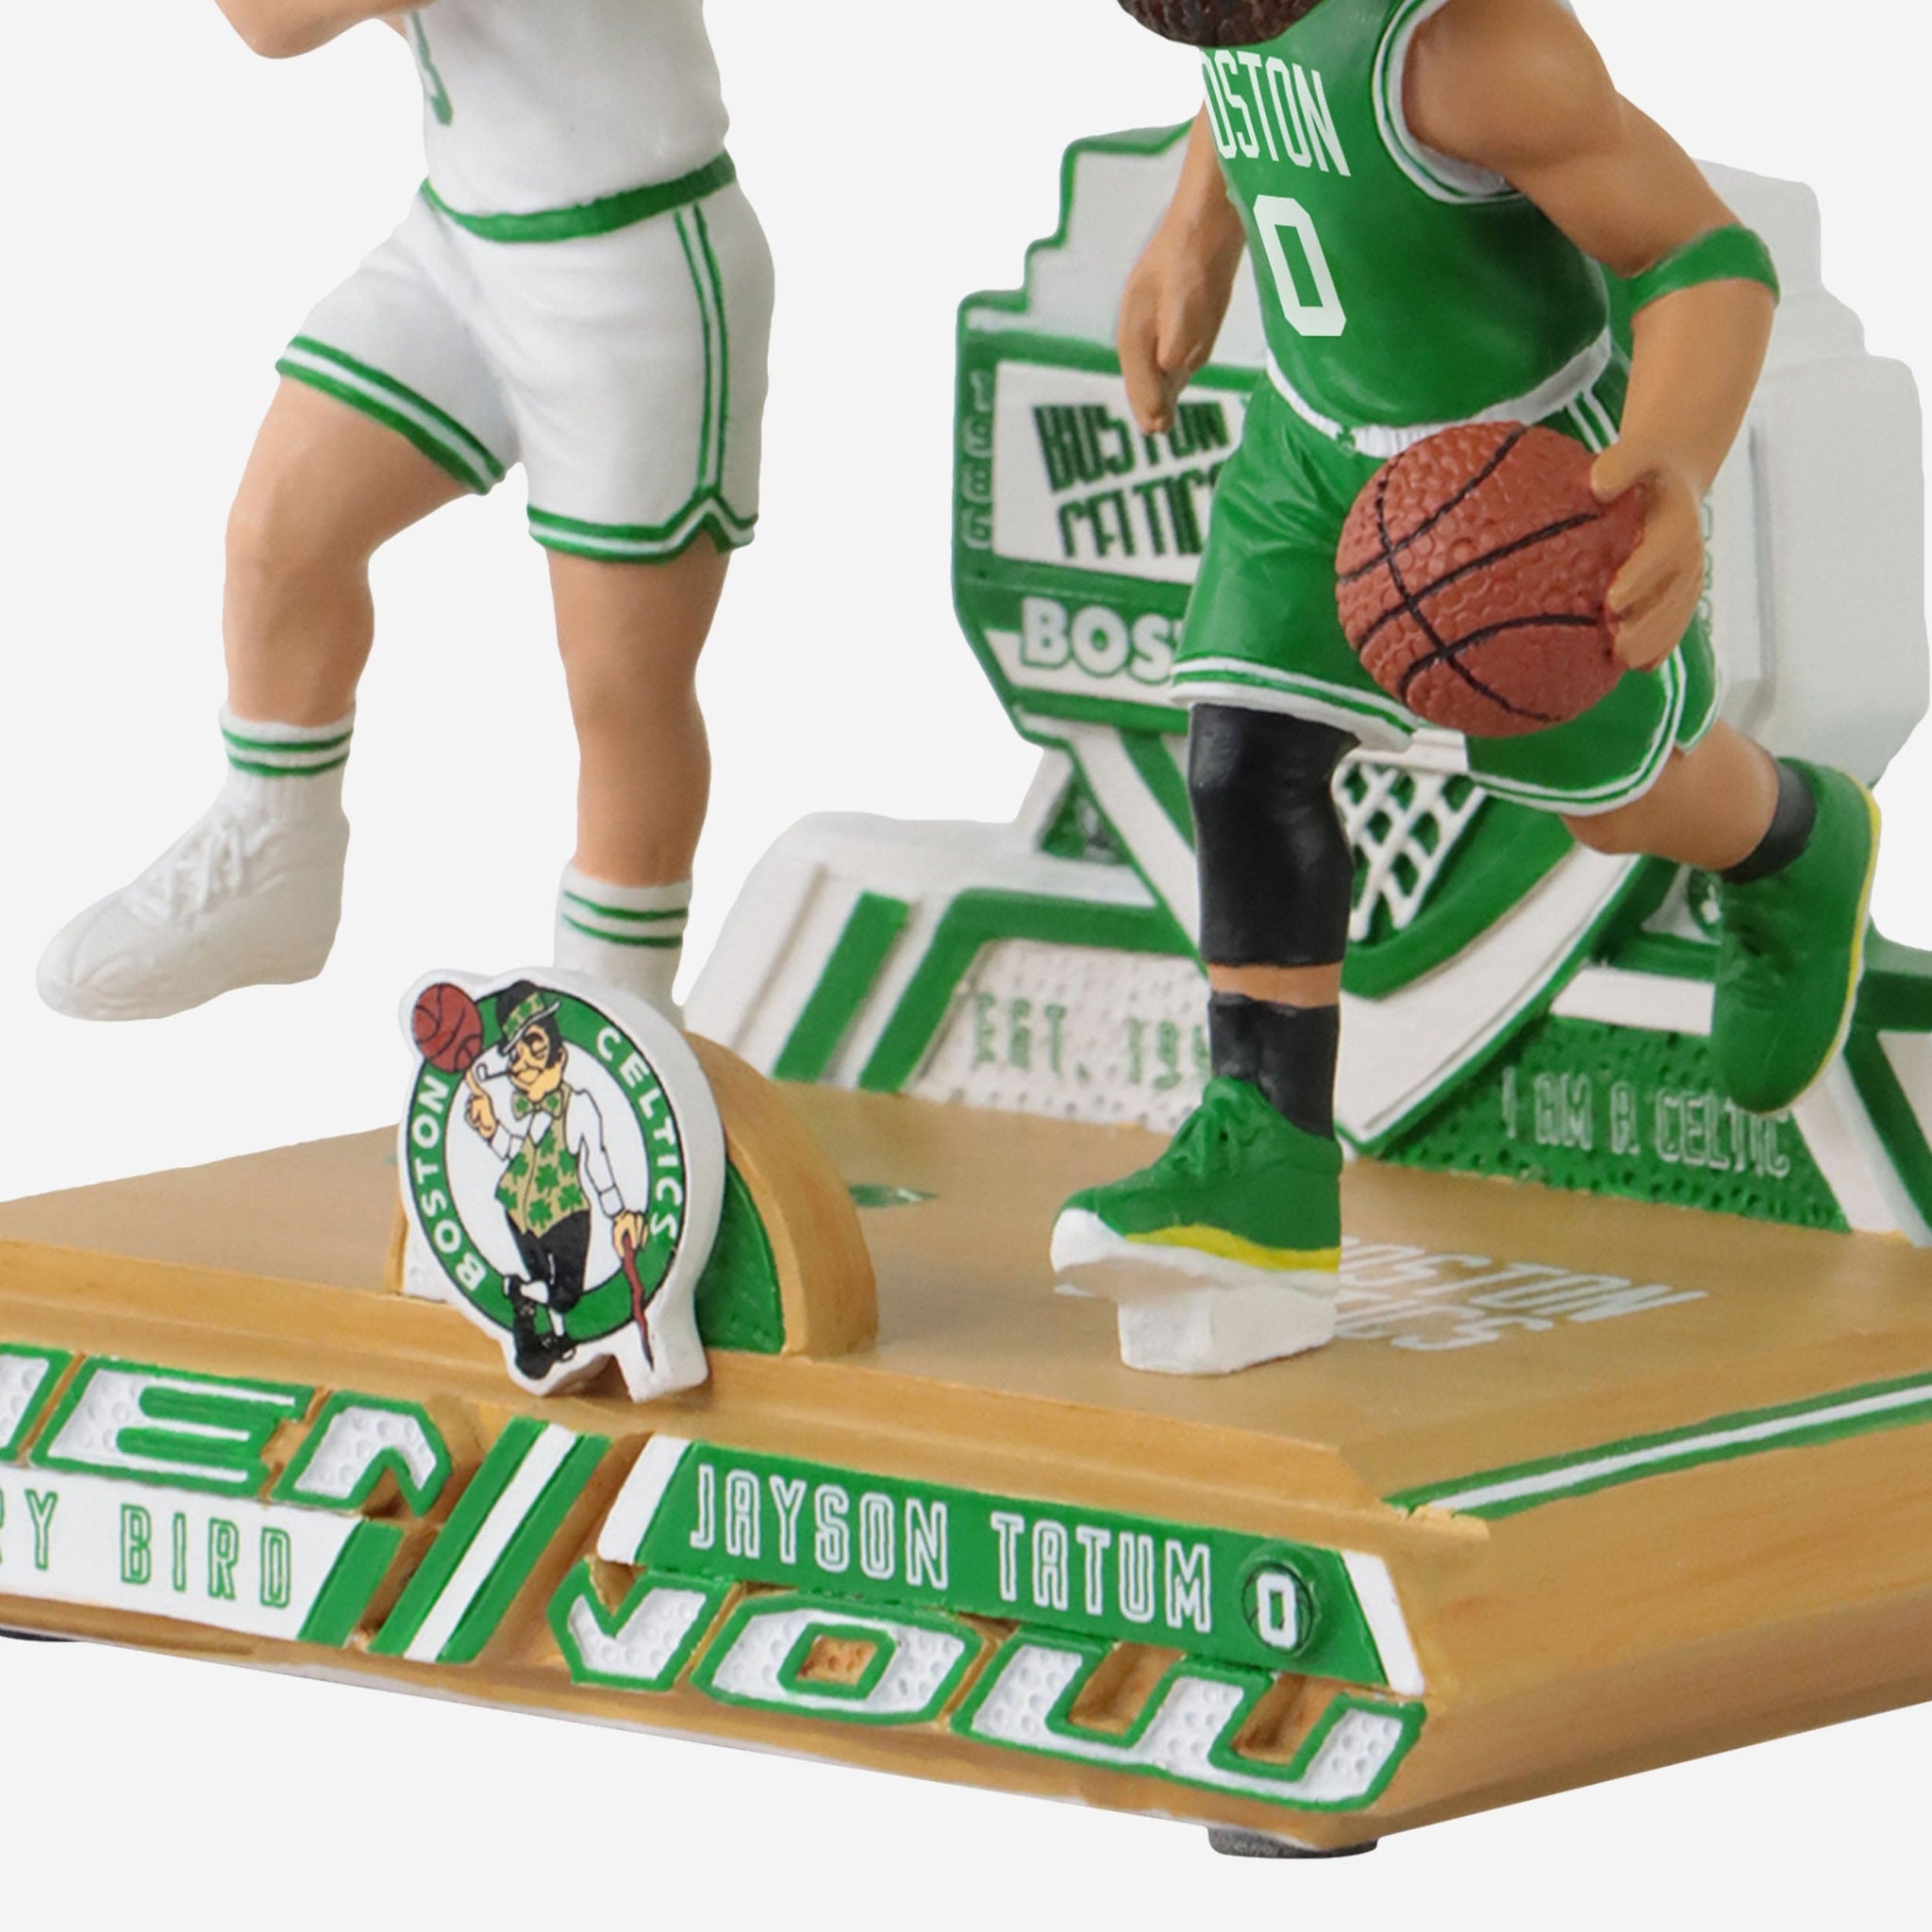 How to buy signed Jayson Tatum, Larry Bird and other authentic